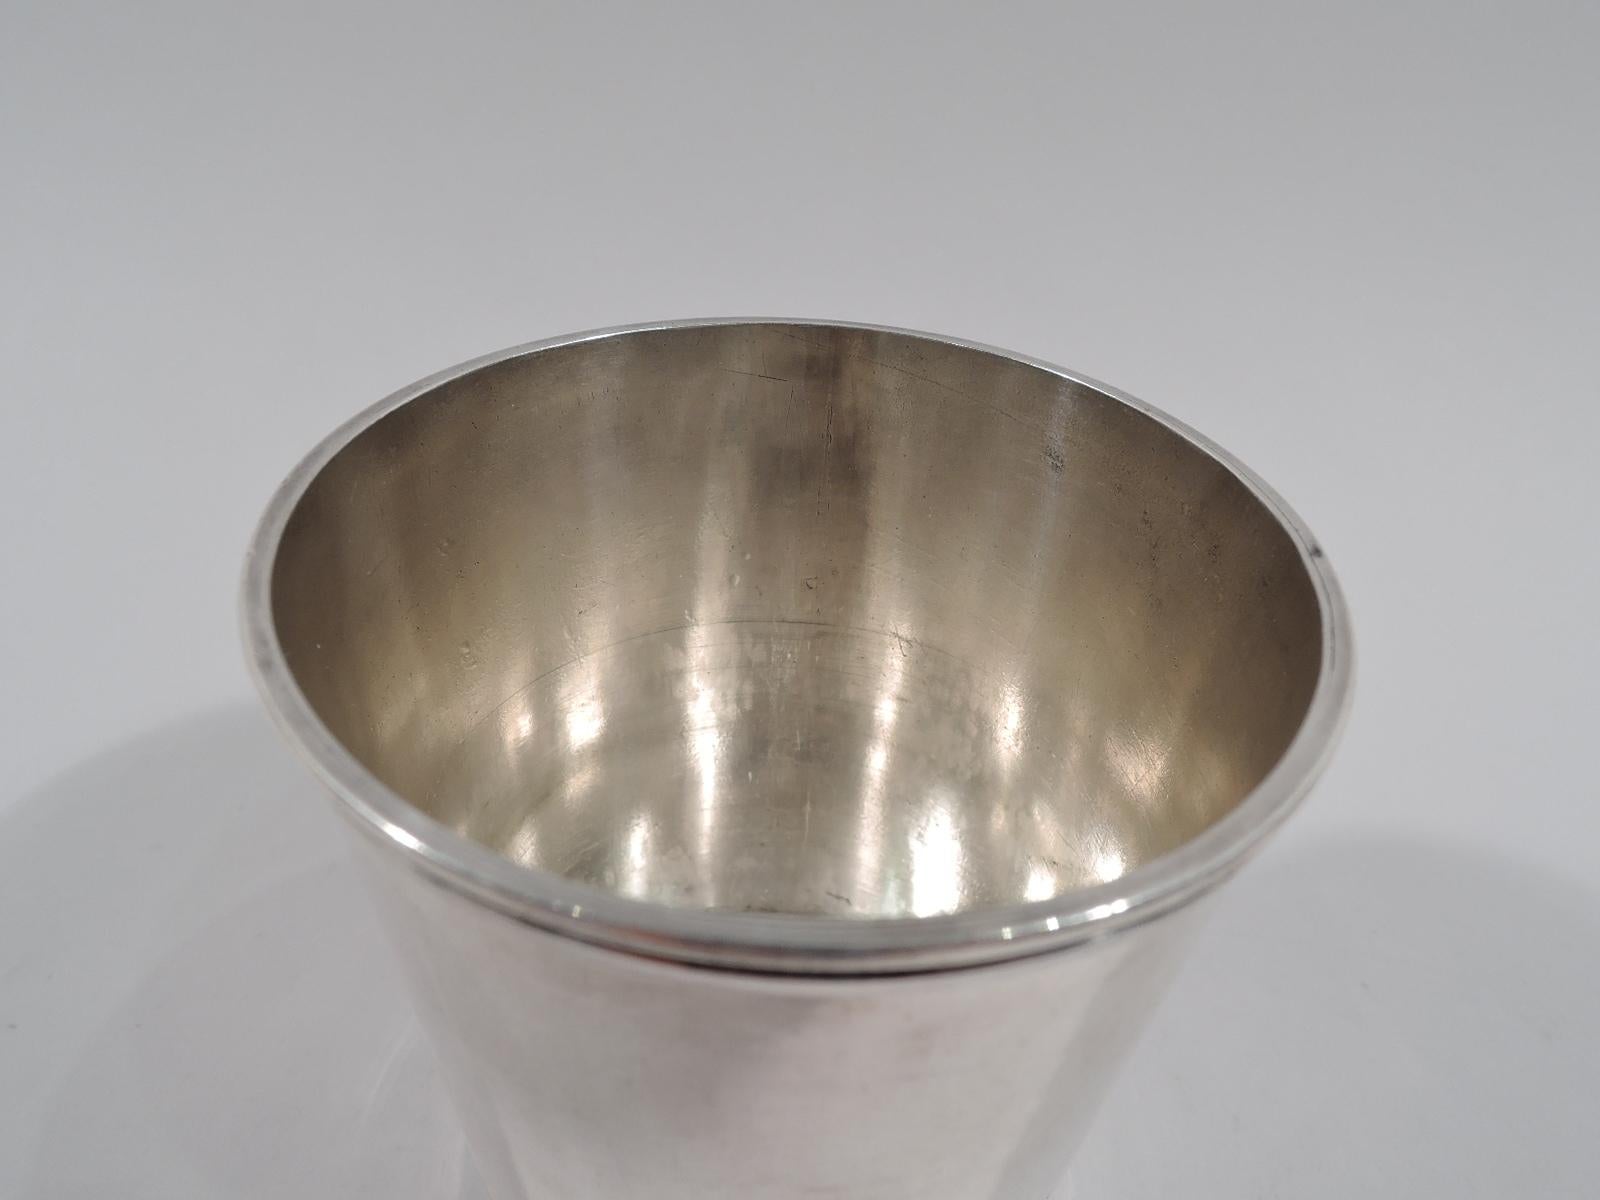 American coin silver mint julep. Made by The Duhme Company in Cincinnati, Ohio, ca 1850. Straight and tapering sides, and molded rim and base. A nice solo cup by an important regional maker. Marked “Duhme & Co.” Weight: 4 troy ounces.